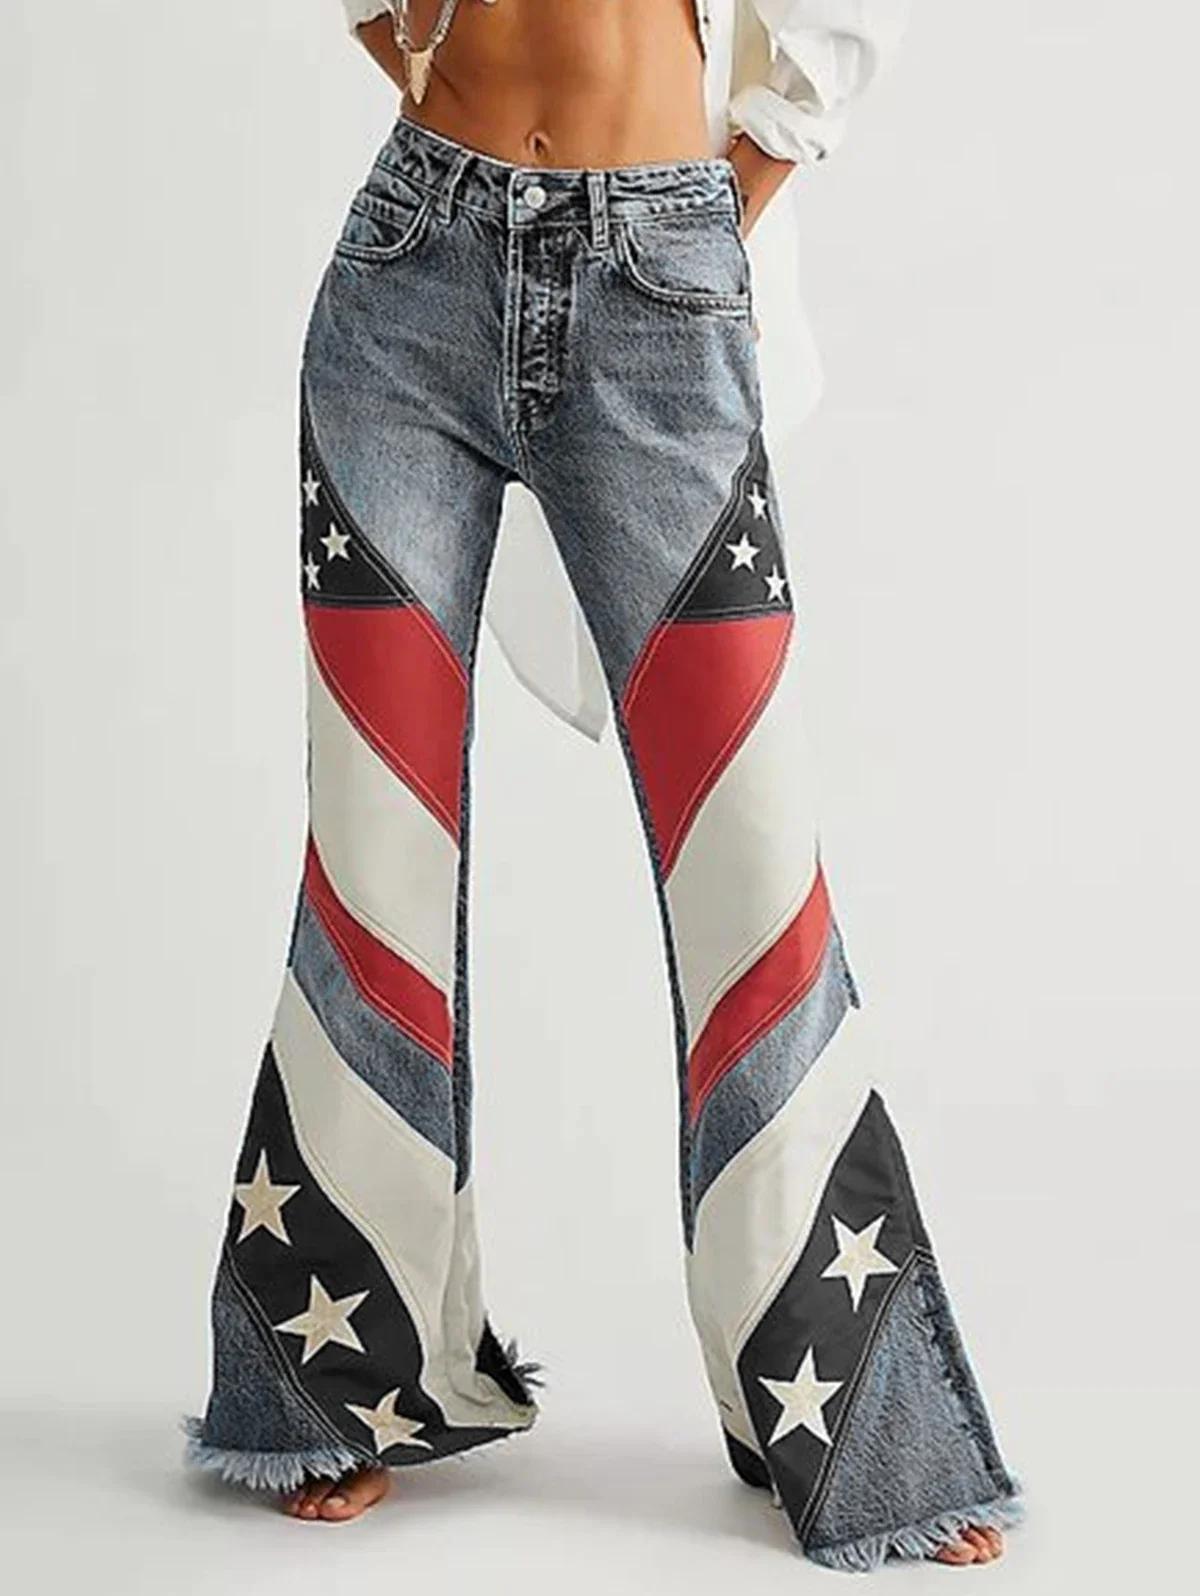 Women Jeans Fashion High Waist Vintage Flag Print Trousers Casual Denim Patchwork Washed Raw Trim Flare Leg Jeans New Arrival